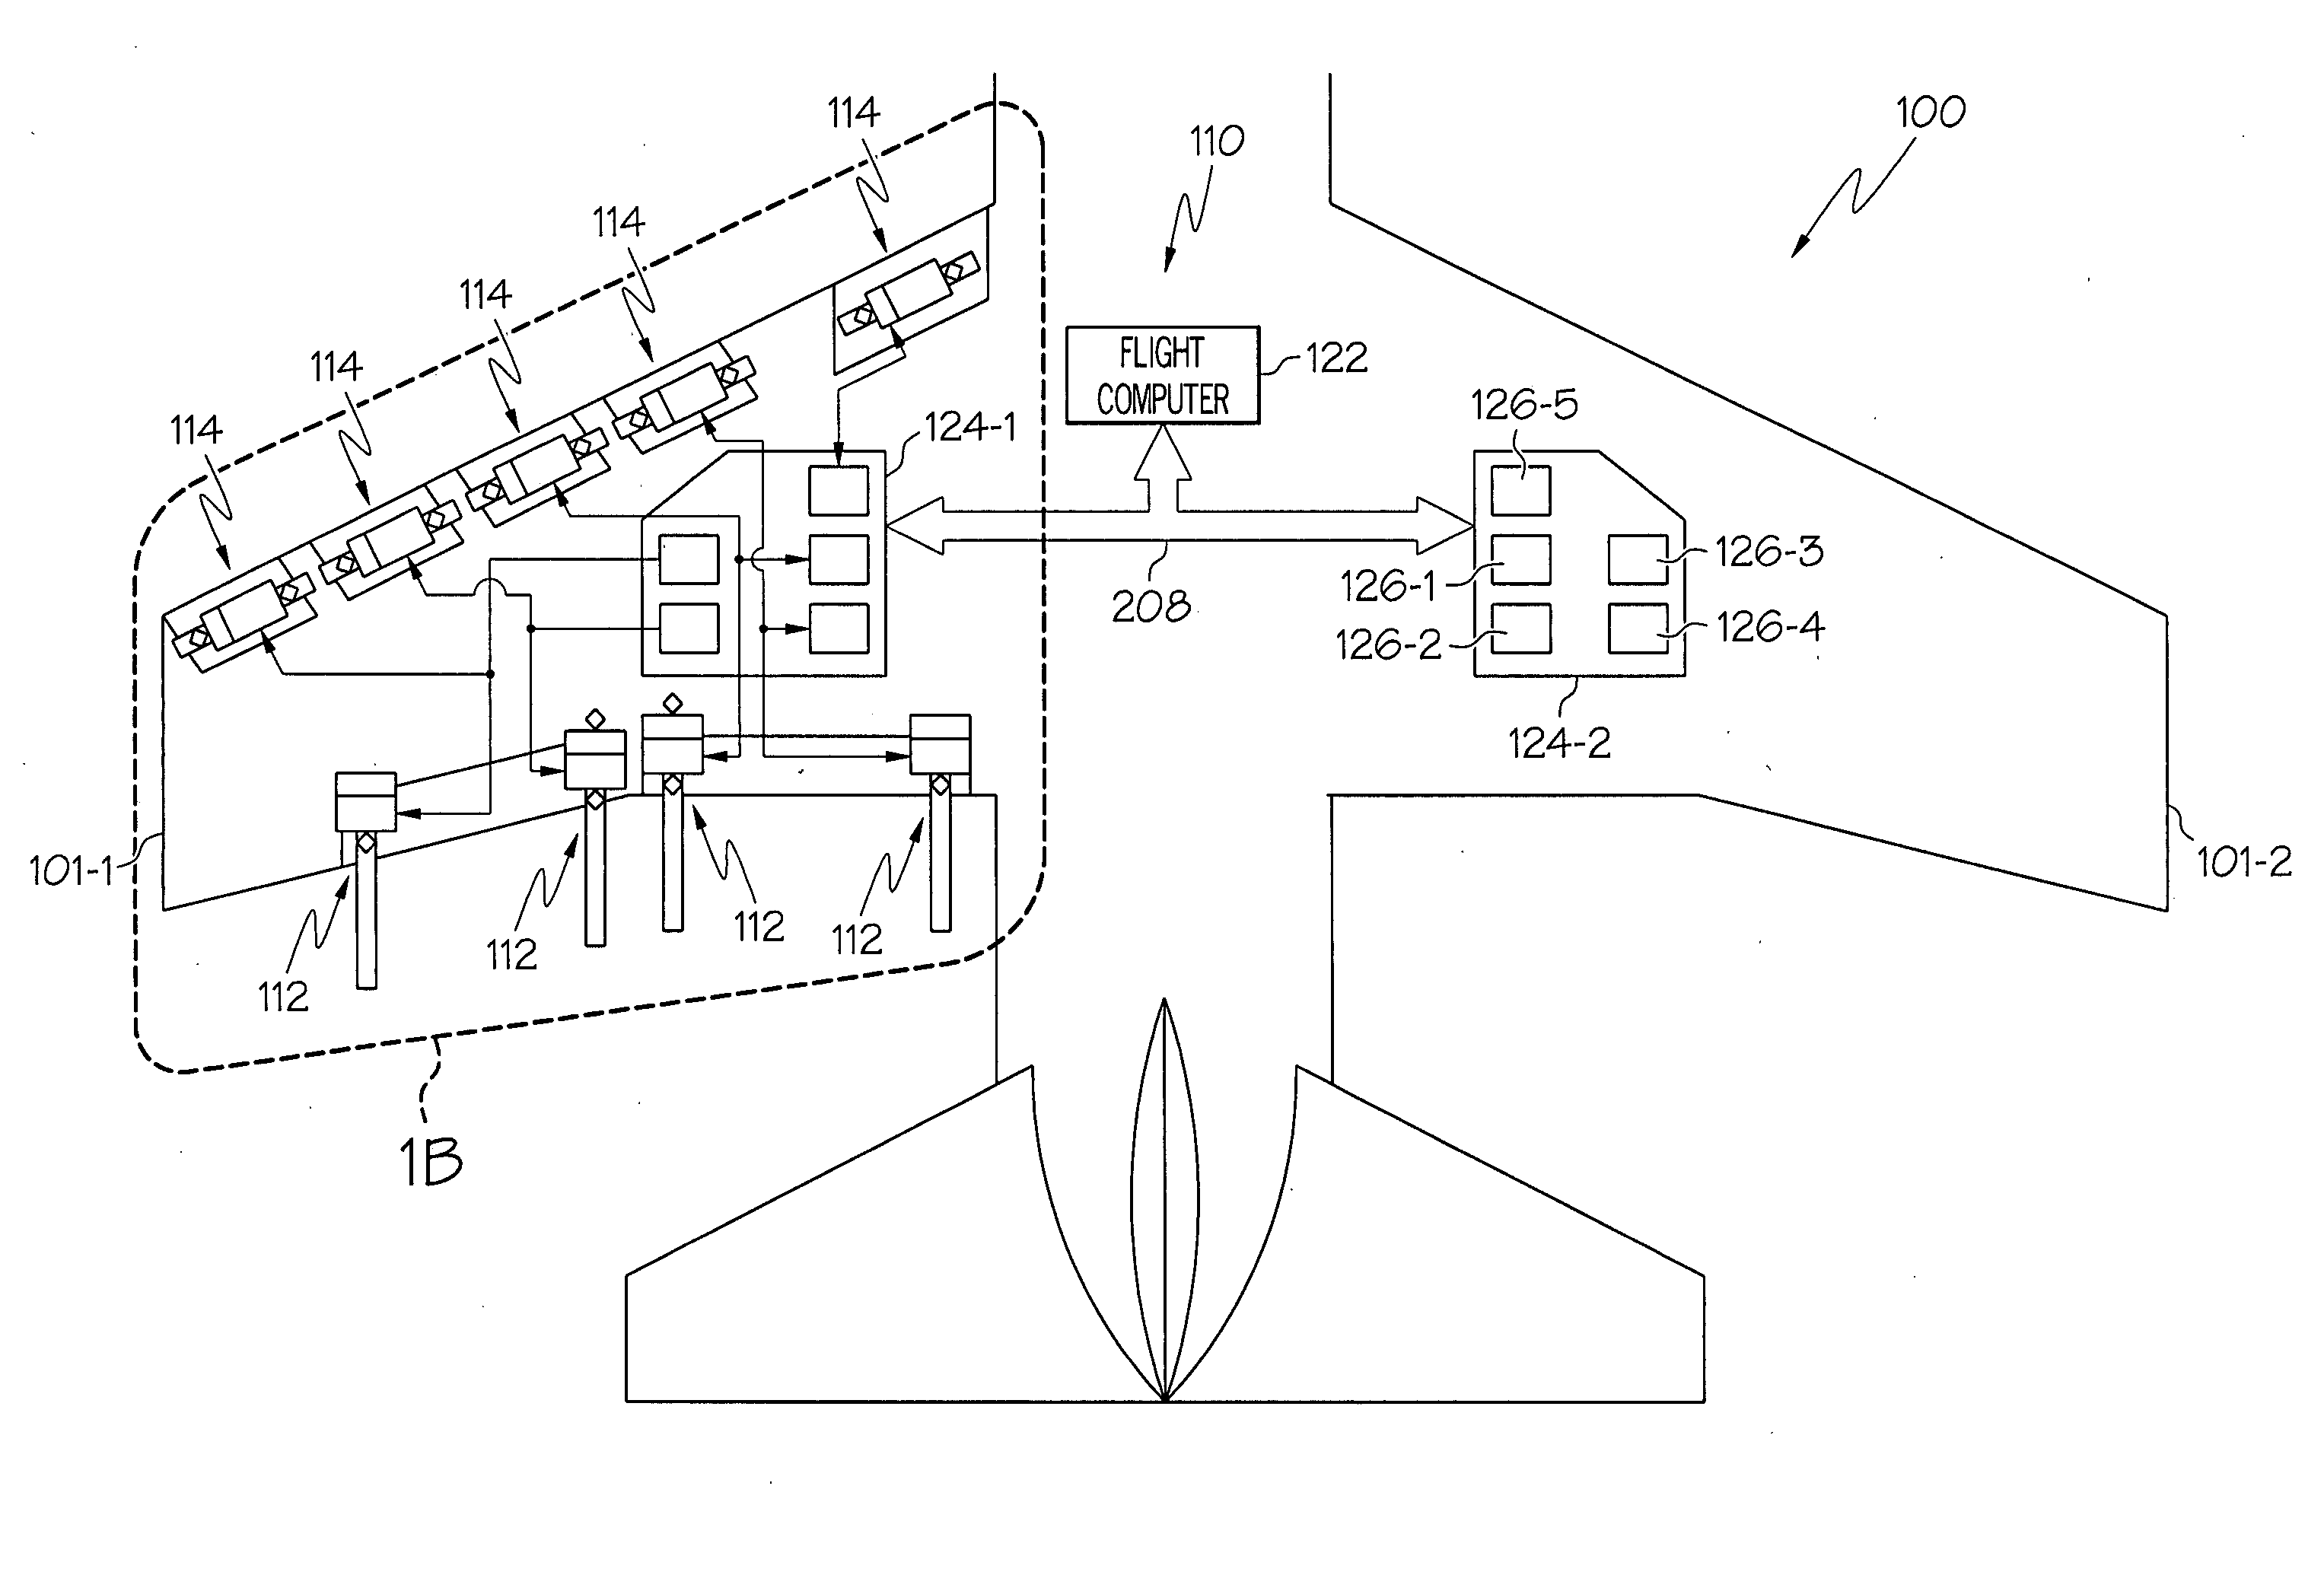 Distributed flight control surface actuation system